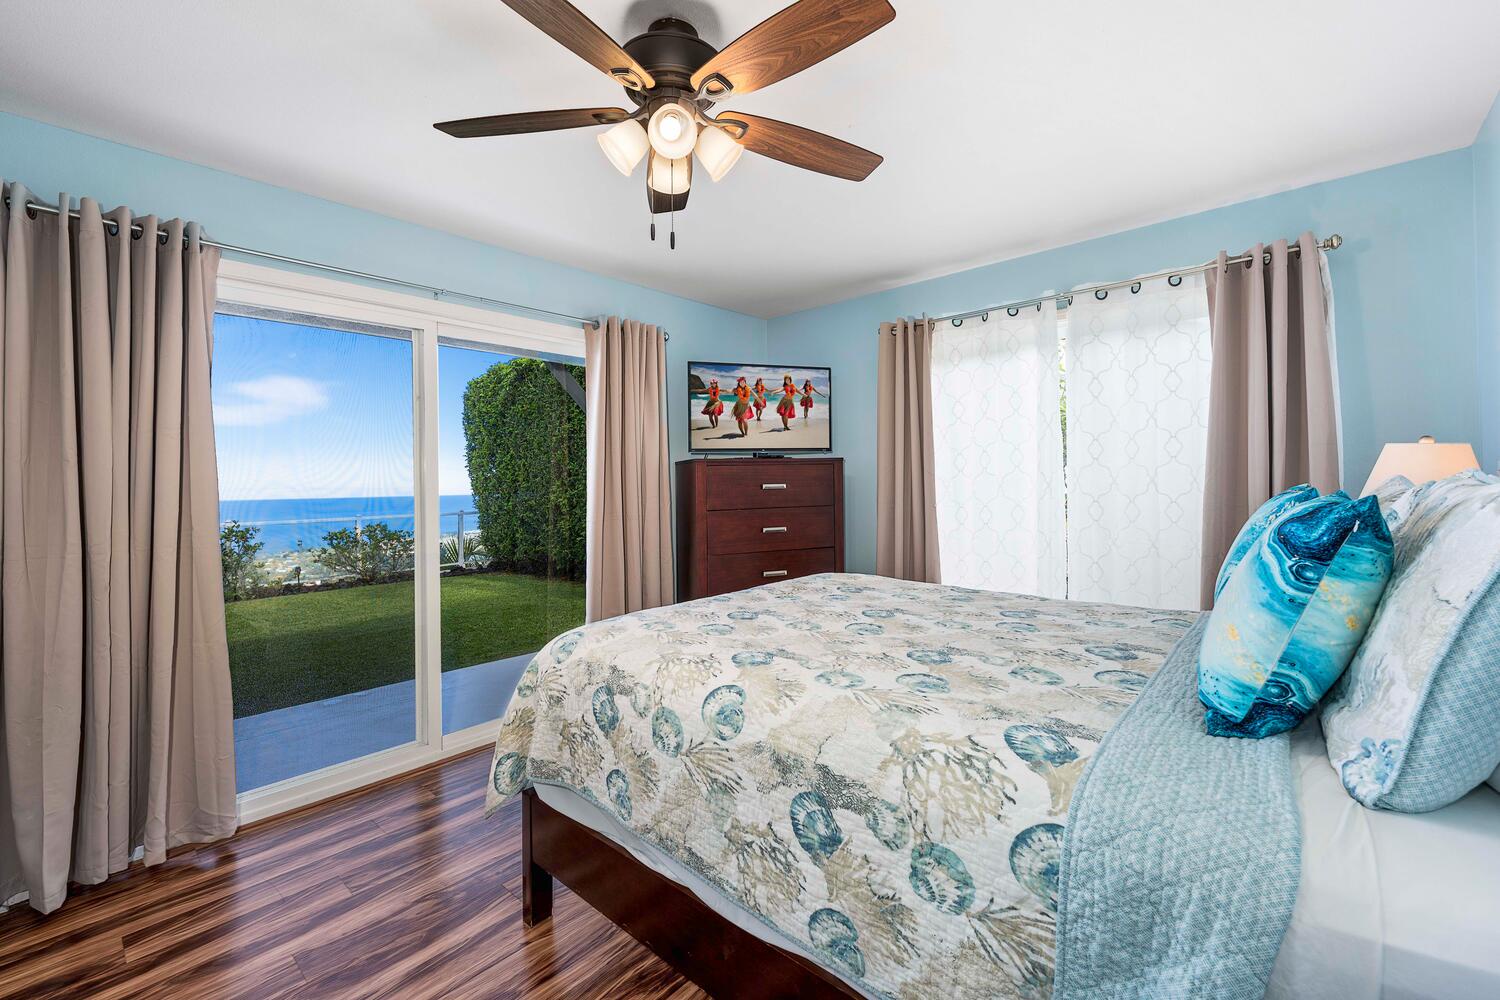 Kailua Kona Vacation Rentals, Honu O Kai (Turtle of the Sea) - The Queen Guest Bedroom with garden and ocean views at ground level.